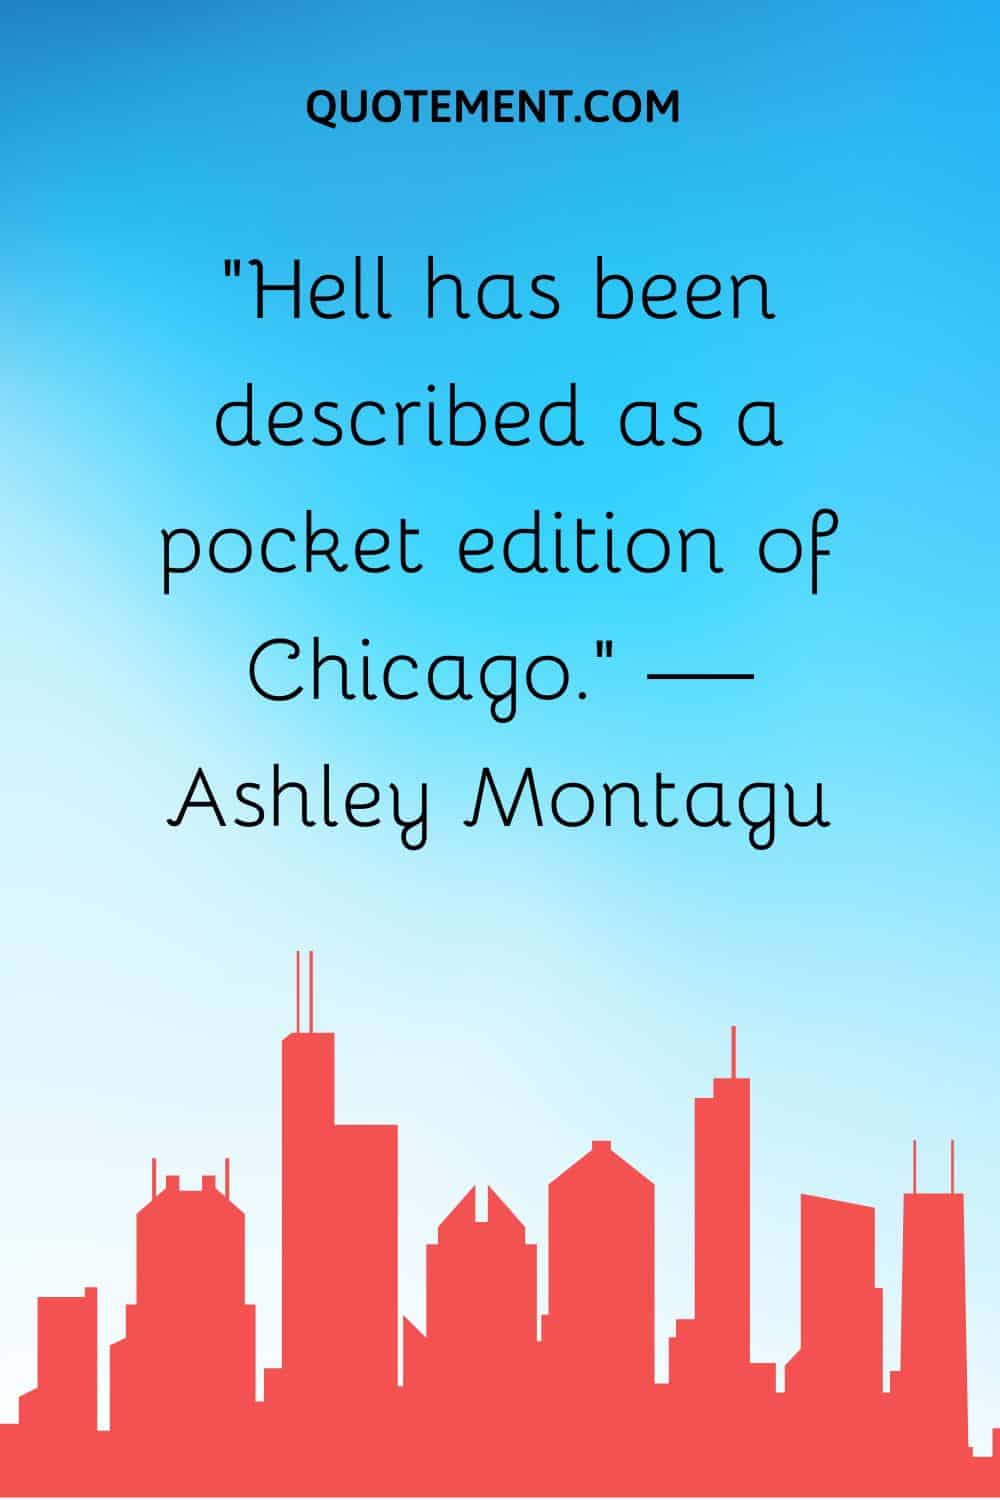 “Hell has been described as a pocket edition of Chicago.” — Ashley Montagu